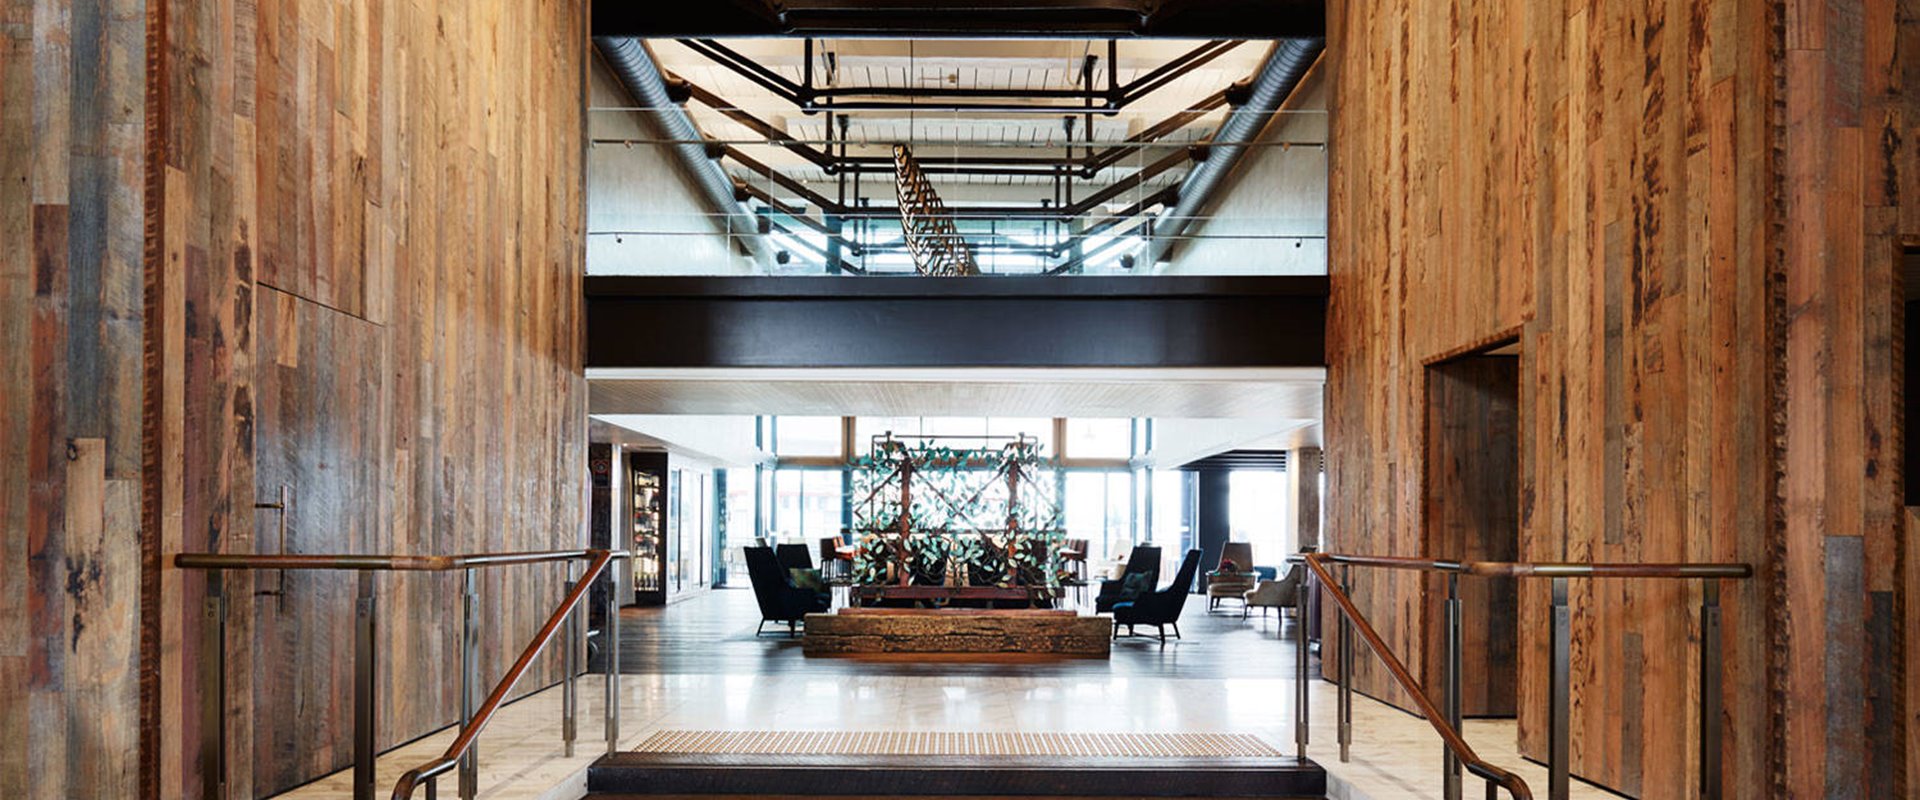 Pier One Sydney Harbour | Conference Venues Sydney | Conference Venues New South Wales